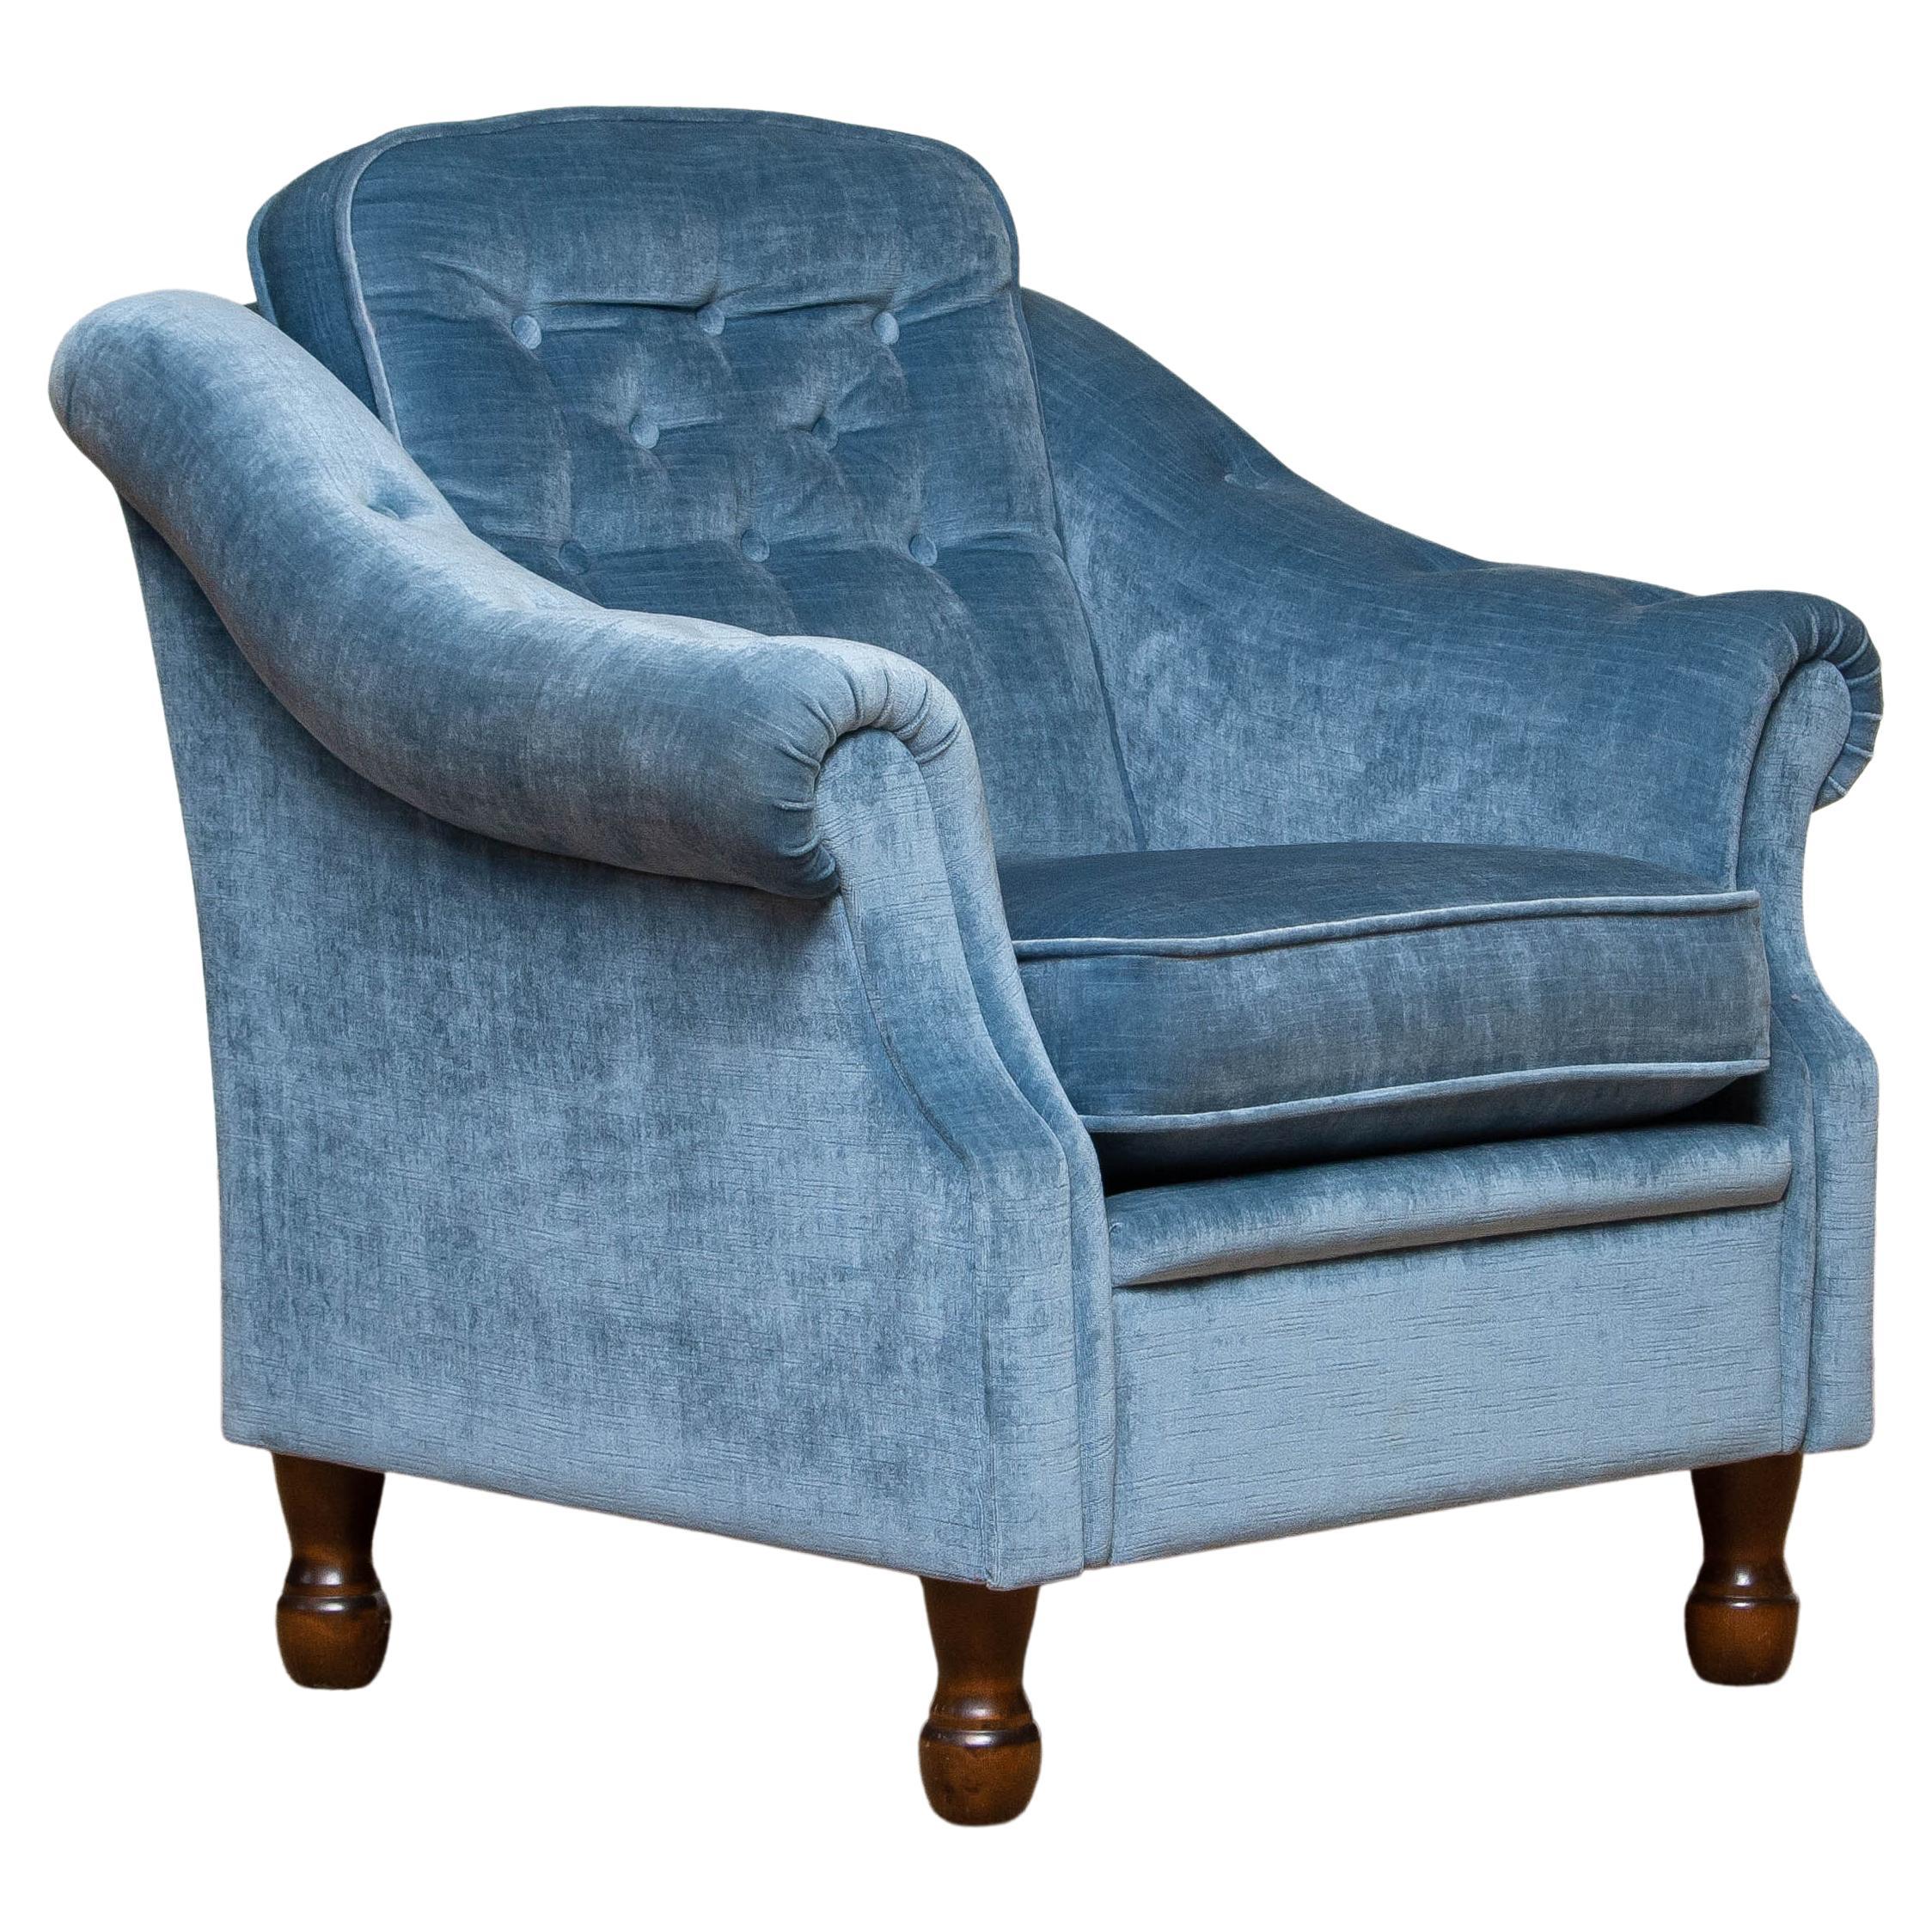 1970's Comfortable Hollywood Regency Lounge Chair with Ice Blue Velvet